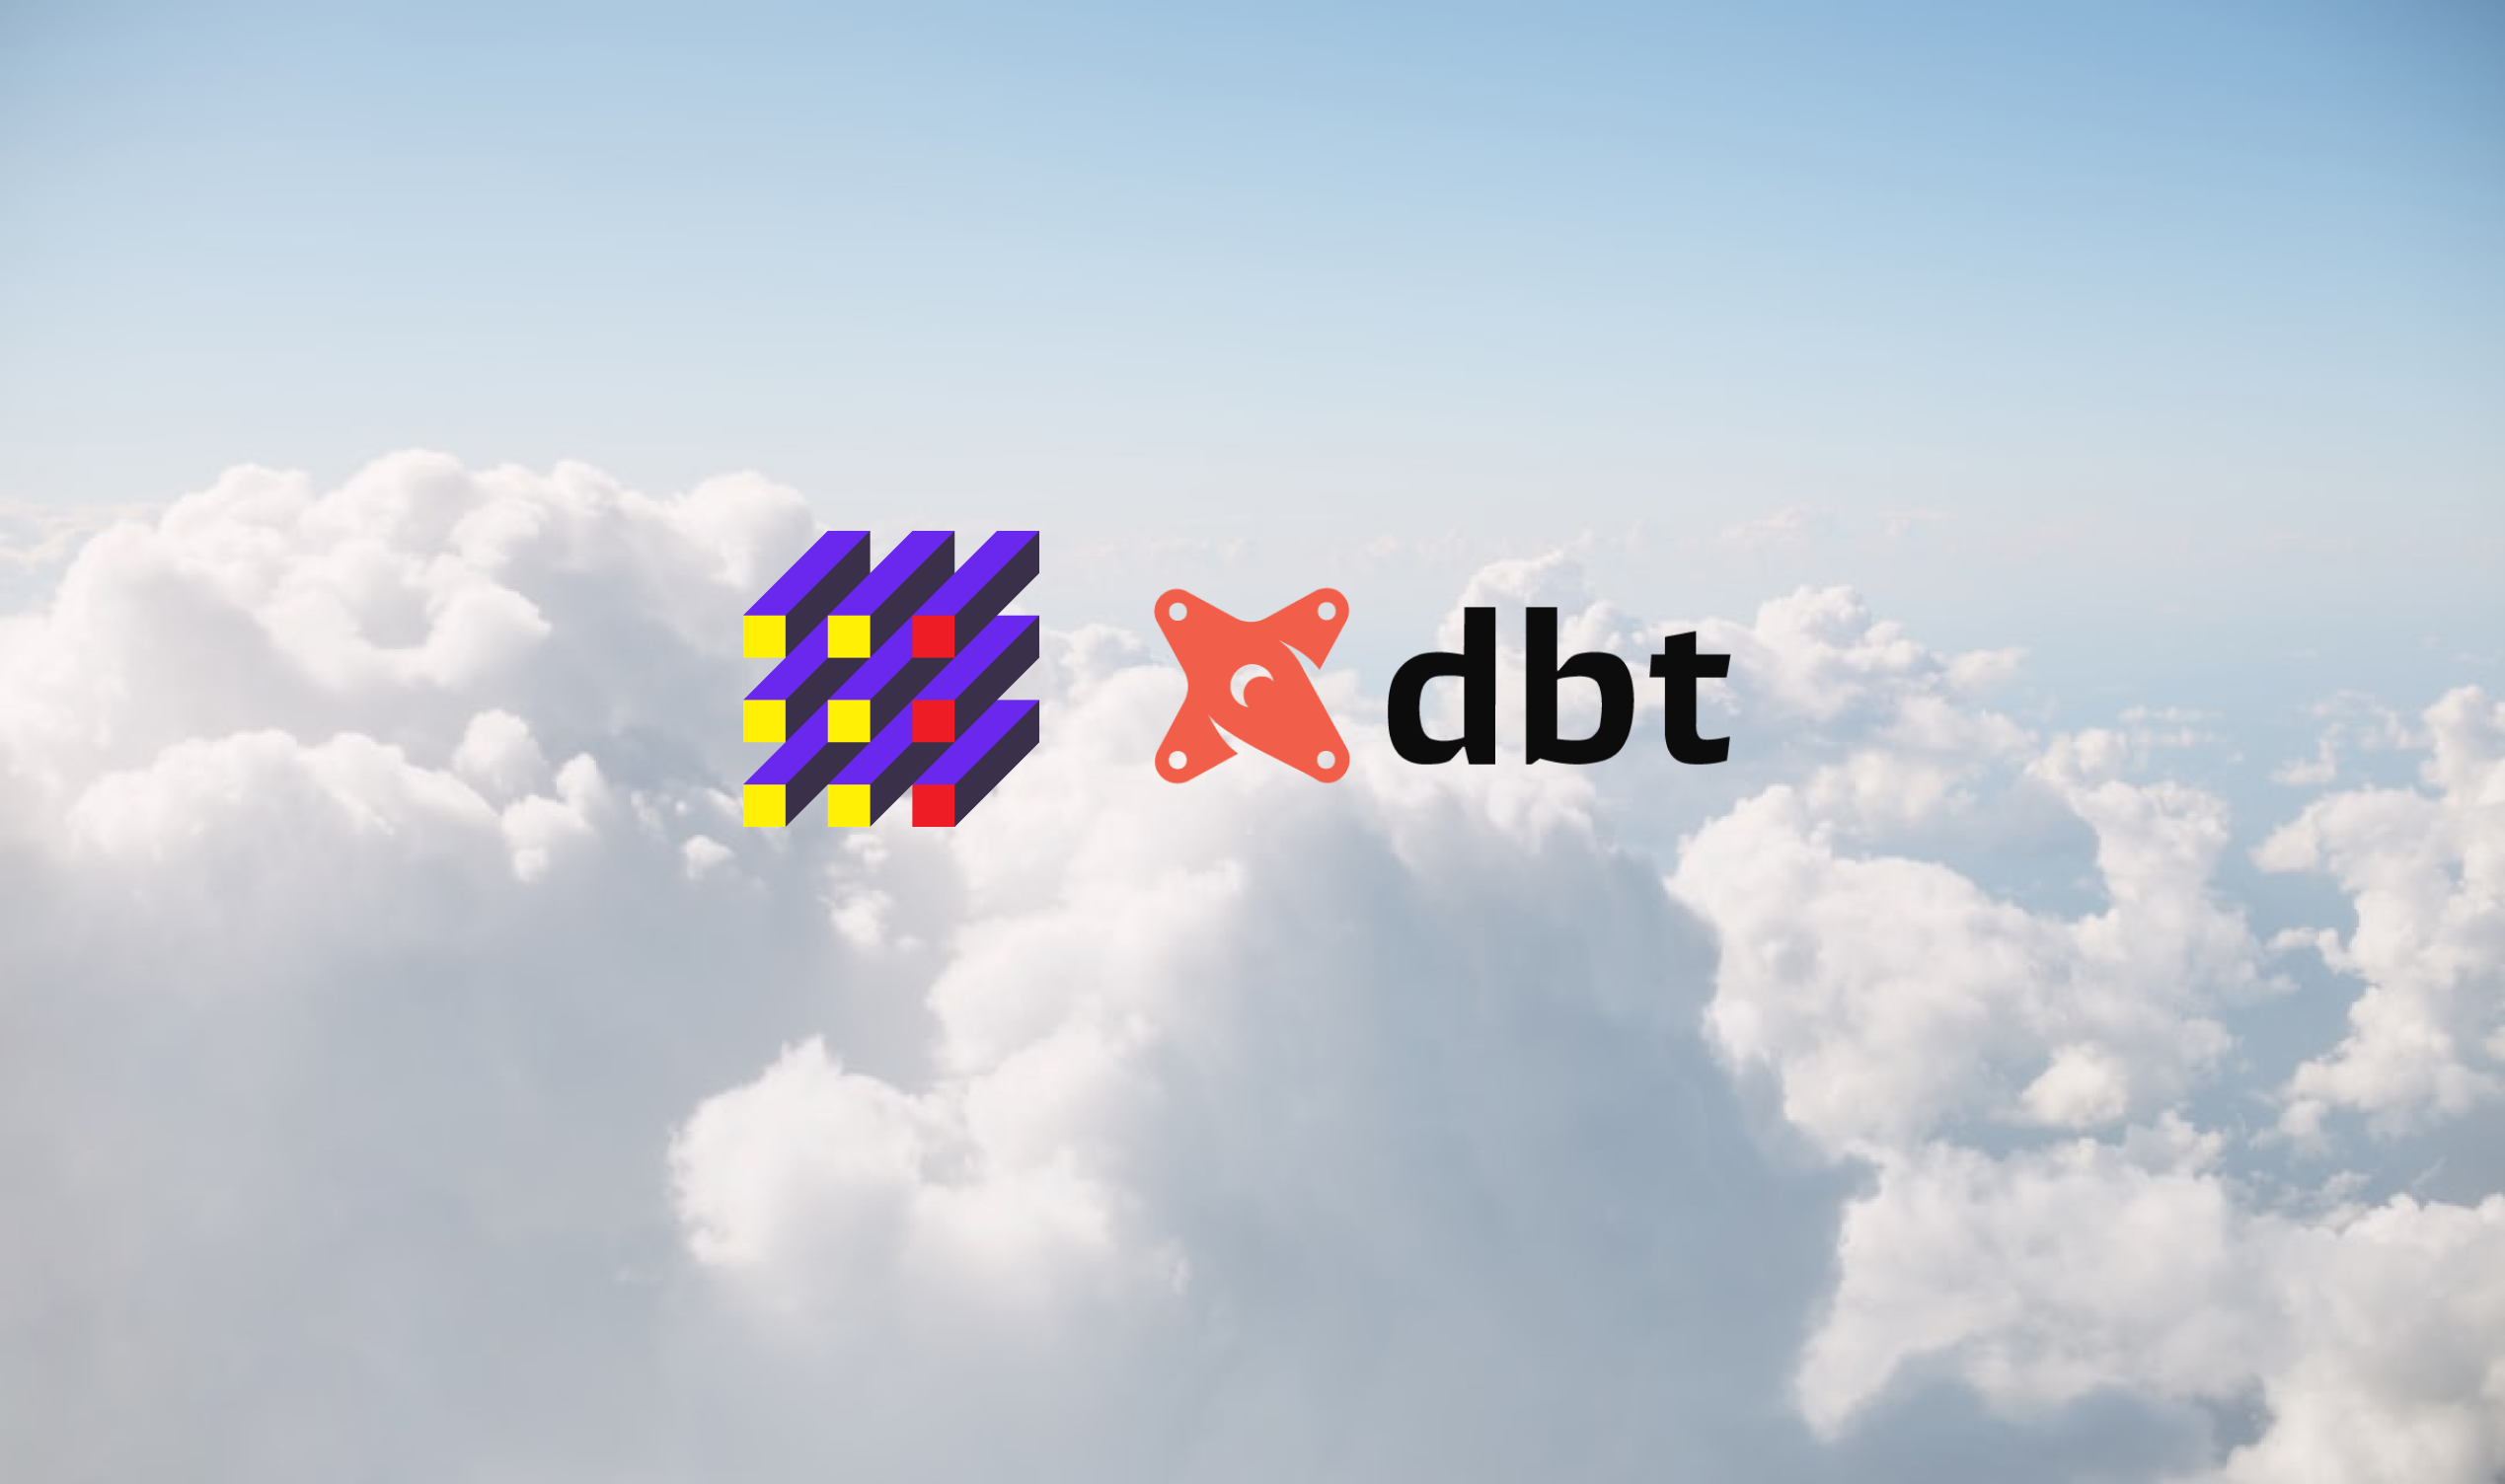 Image of fal and dbt logos on a cloud